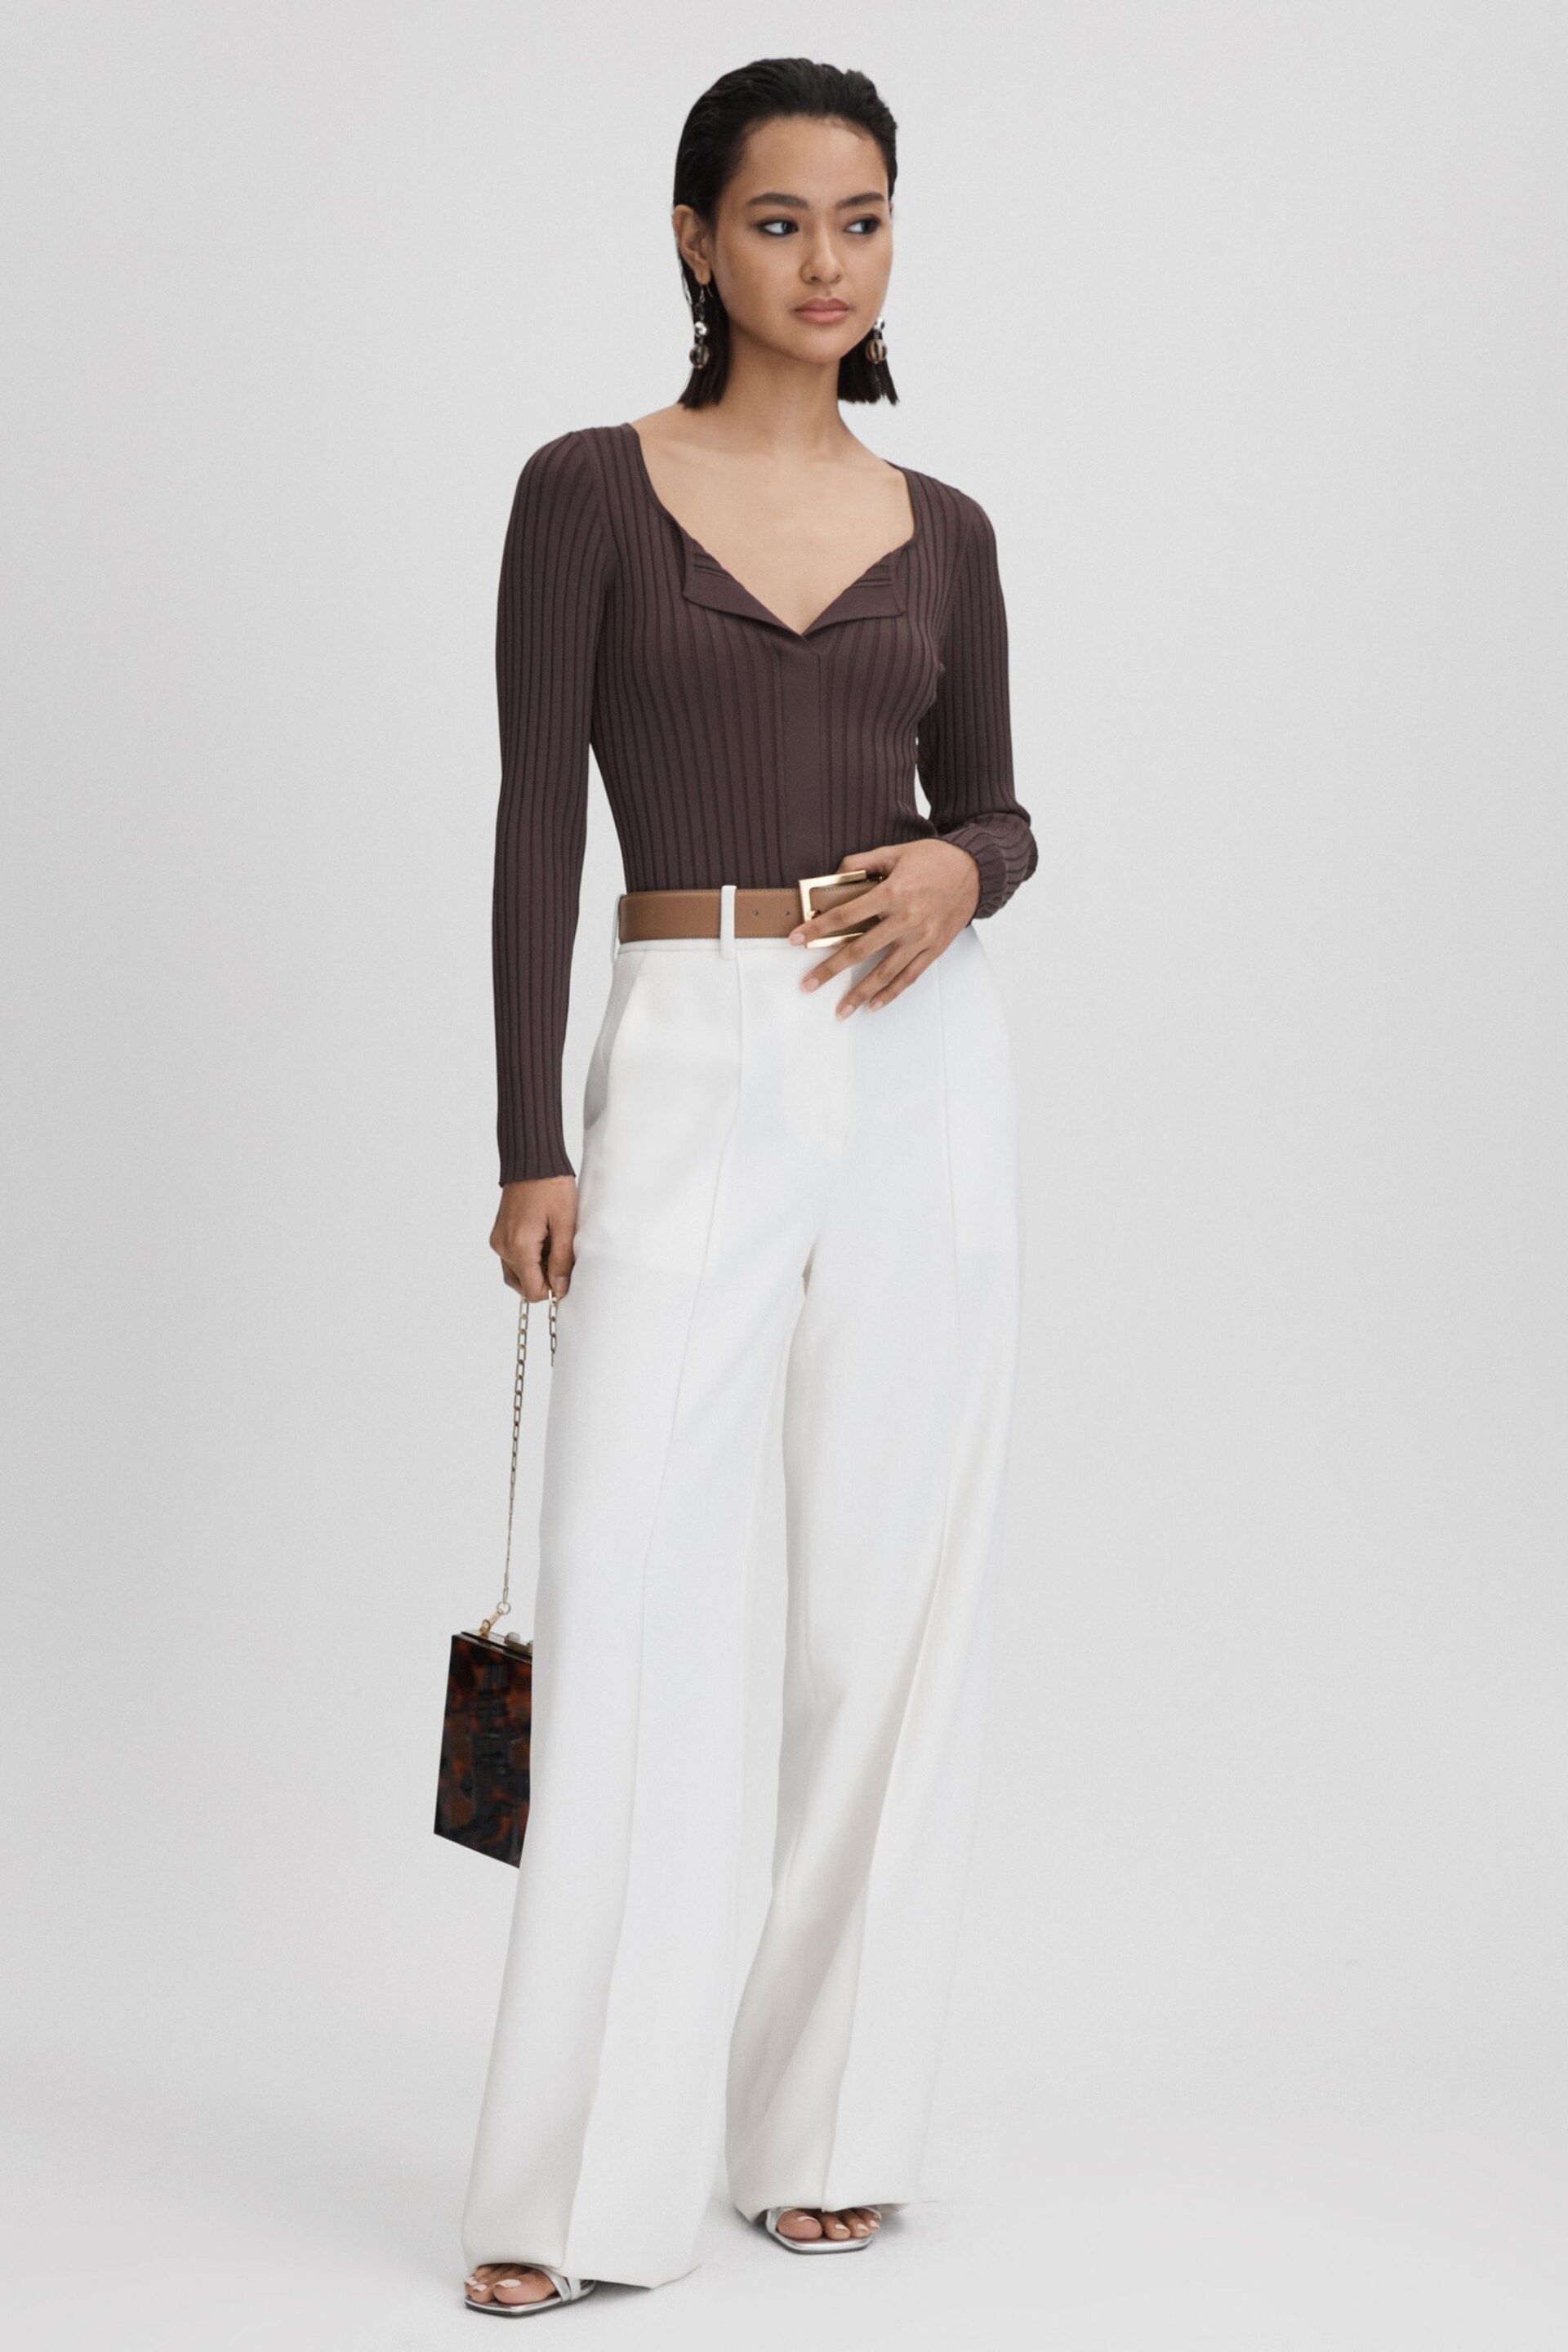 Reiss Burgundy Monica Ribbed Open Collar Top - Image 3 of 6